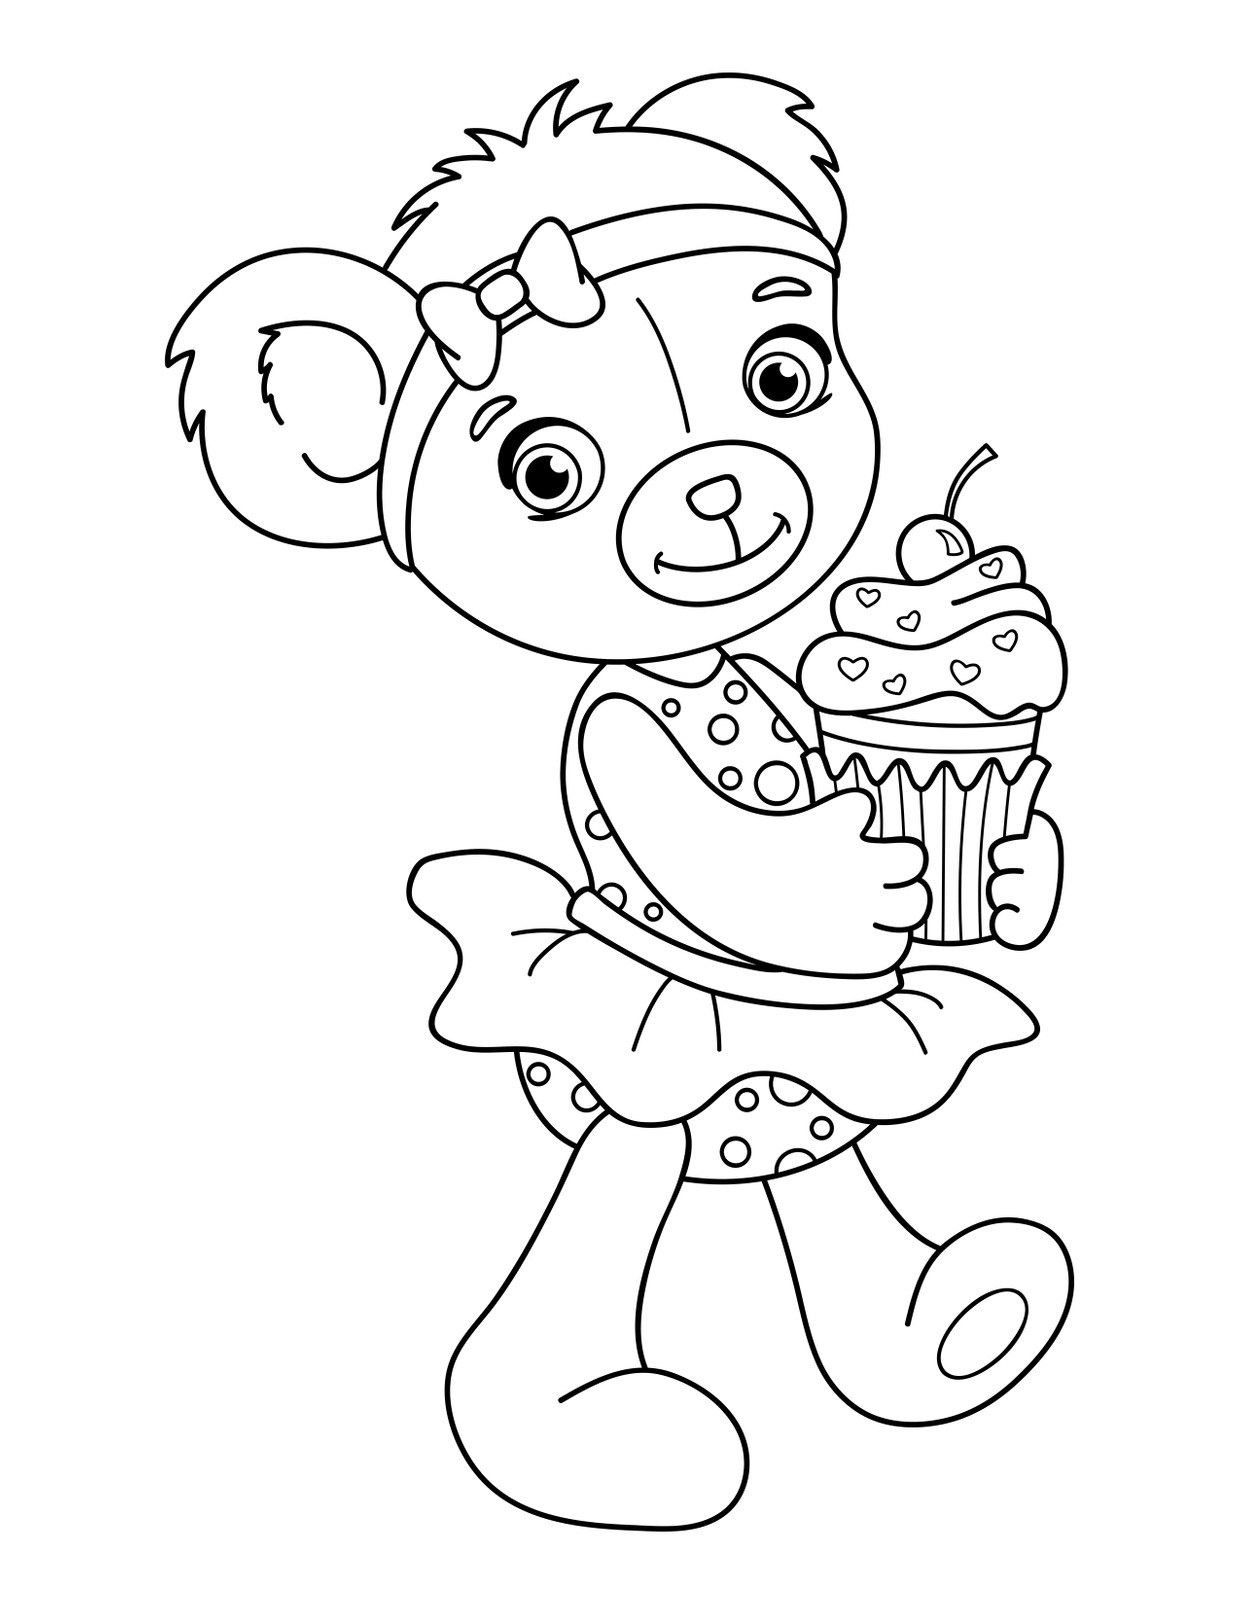 Stuffies toys coloring book